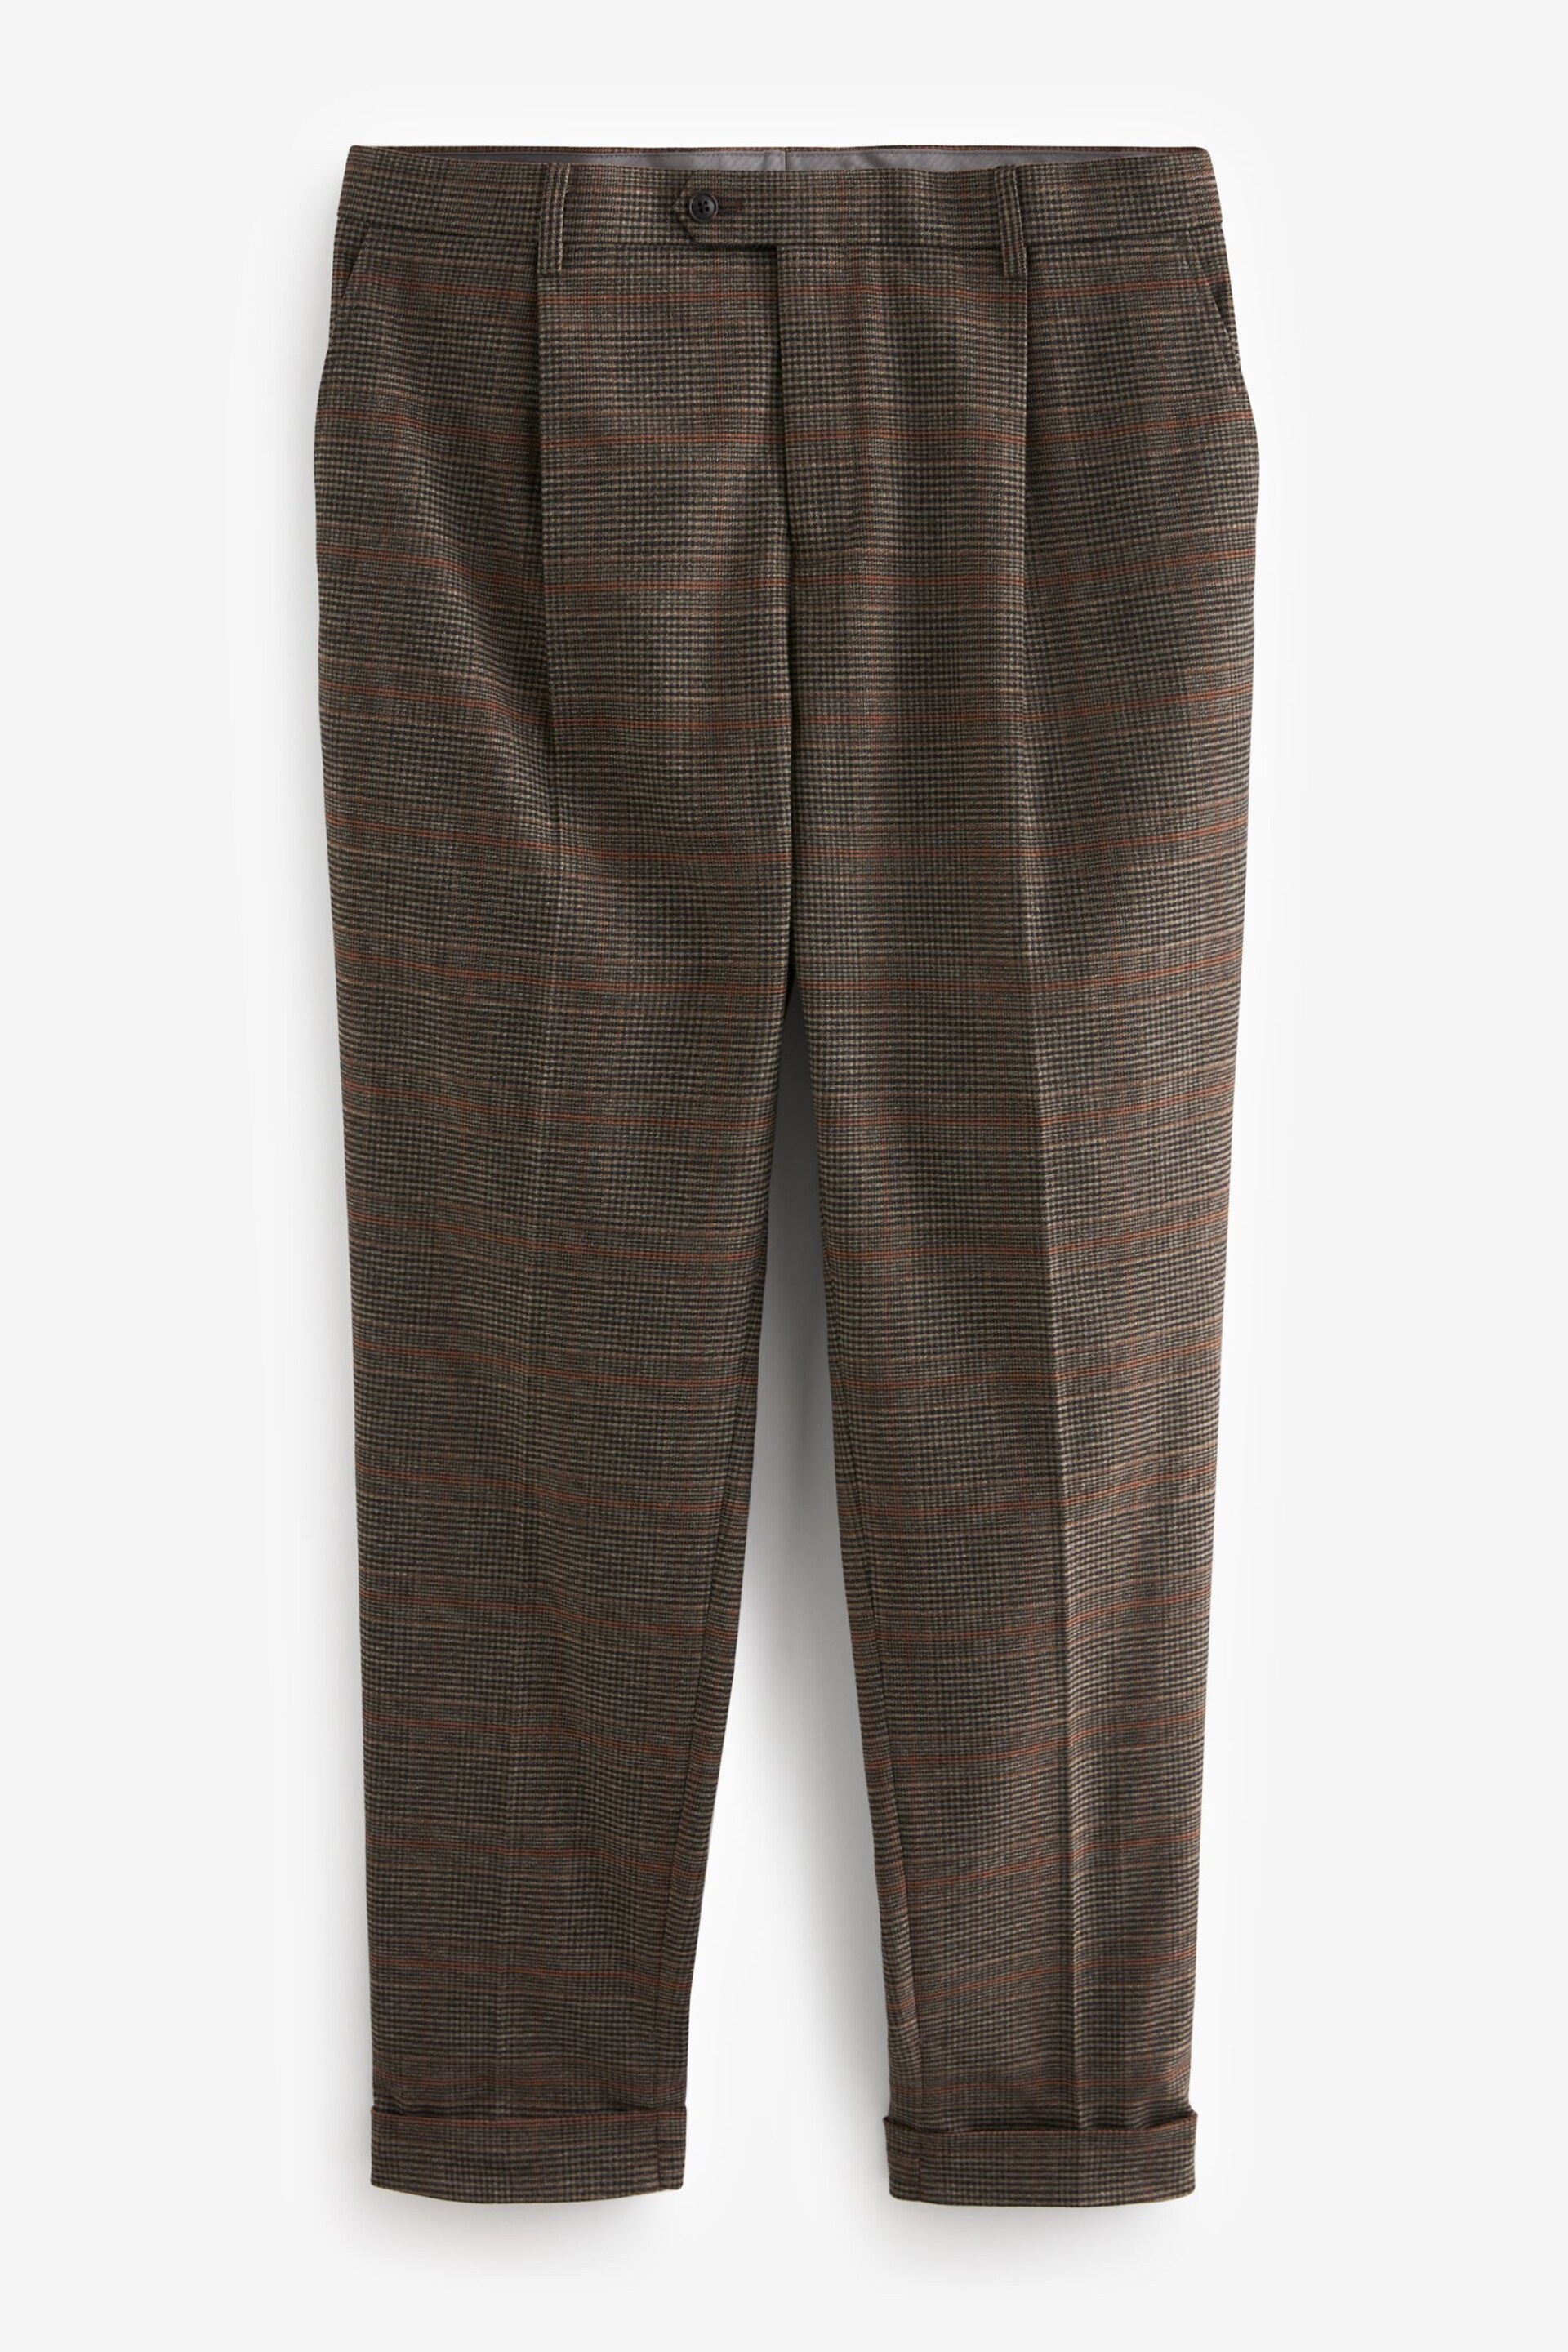 Brown Slim Check Suit Trousers - Image 7 of 11